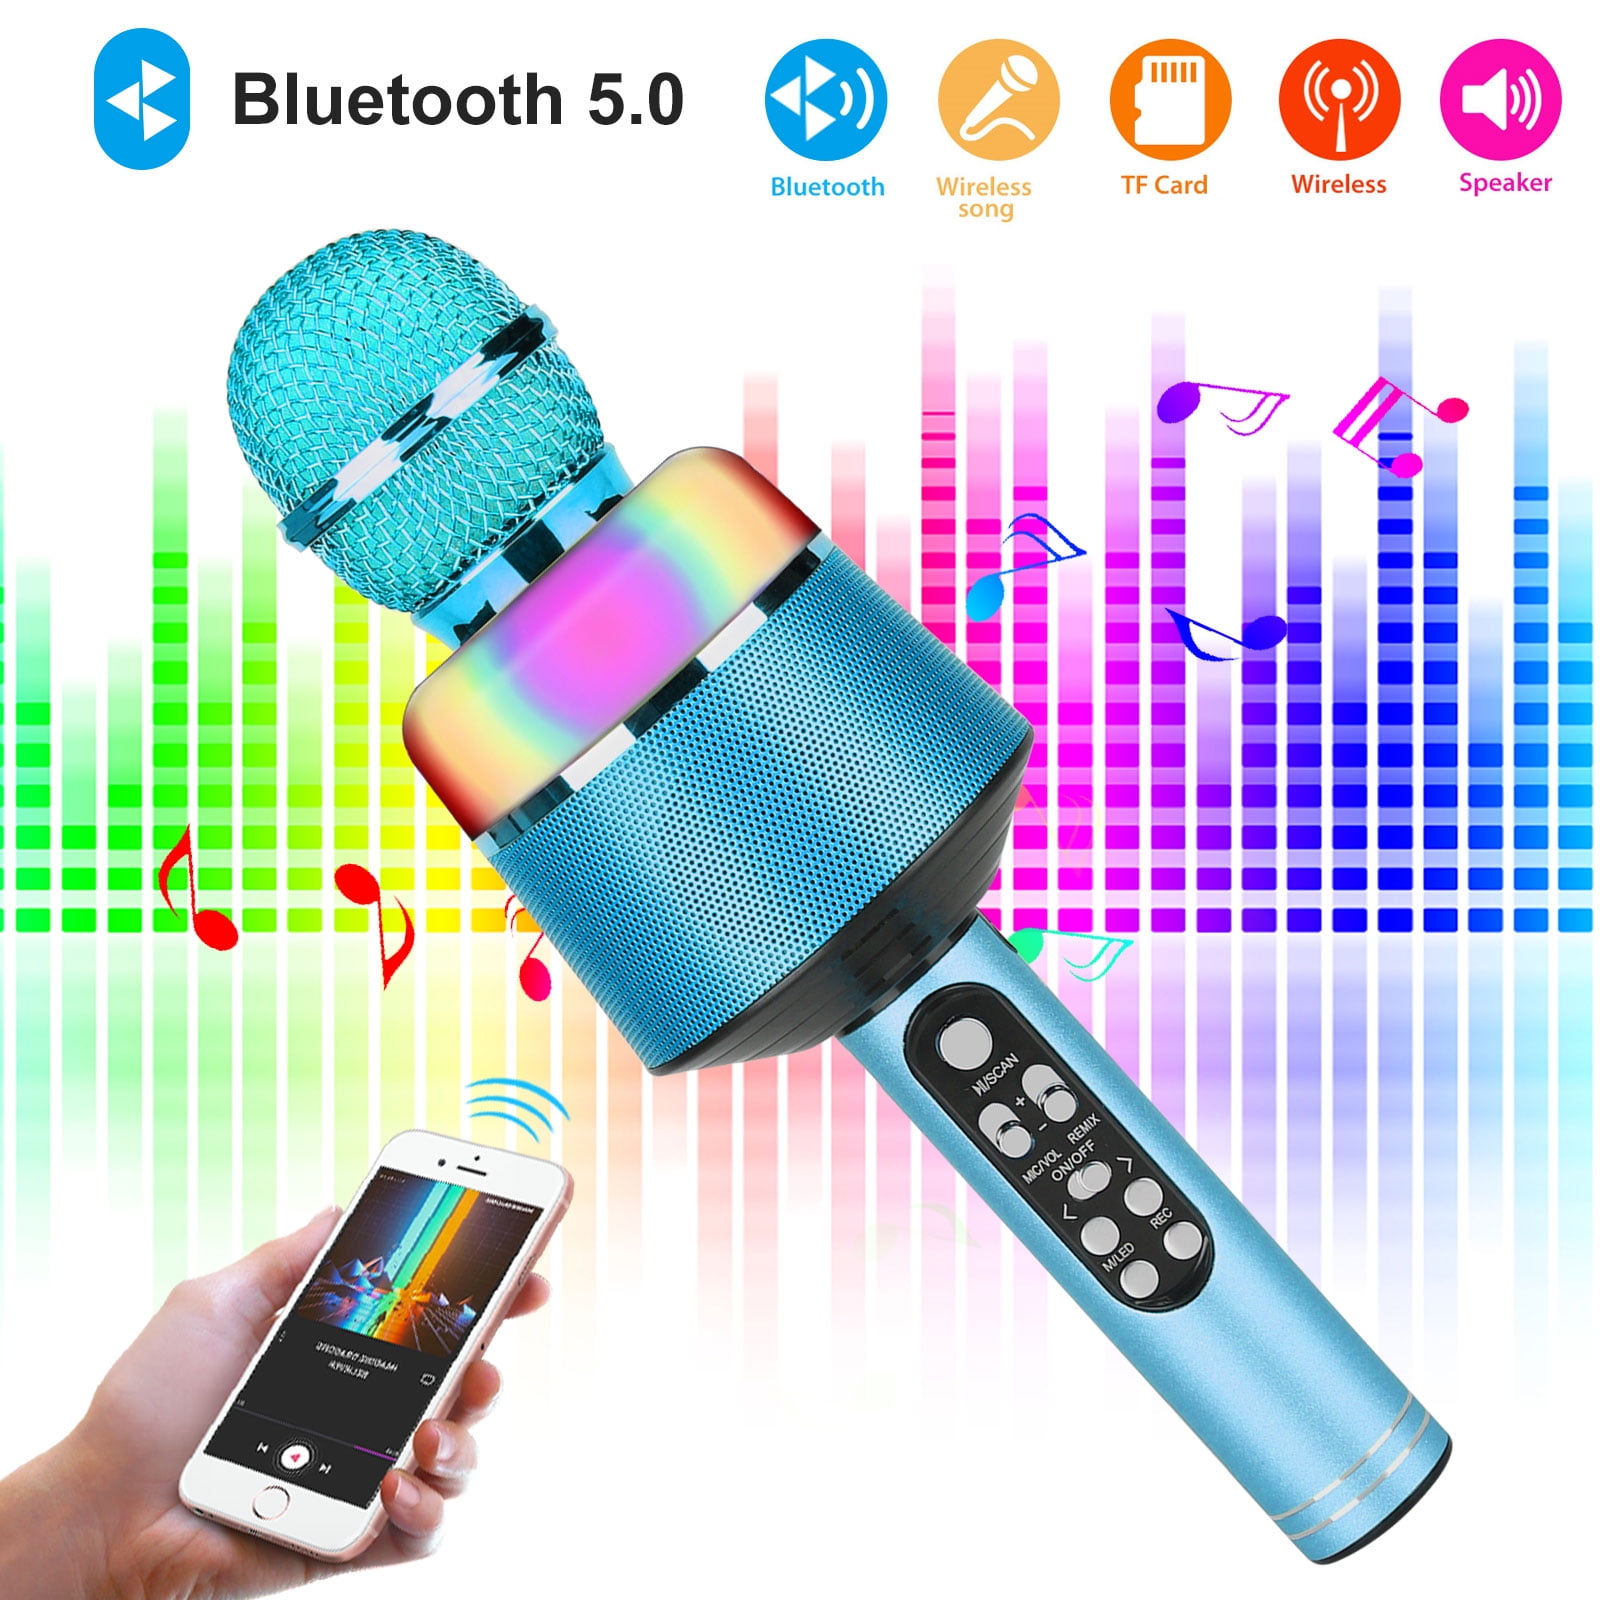 Family Party Karaoke Speaker 4-in-1 Portable Handheld Wireless Bluetooth Microphone,with Double Singing,Controllable LED Lights Bluetooth Karaoke Wireless Microphone 